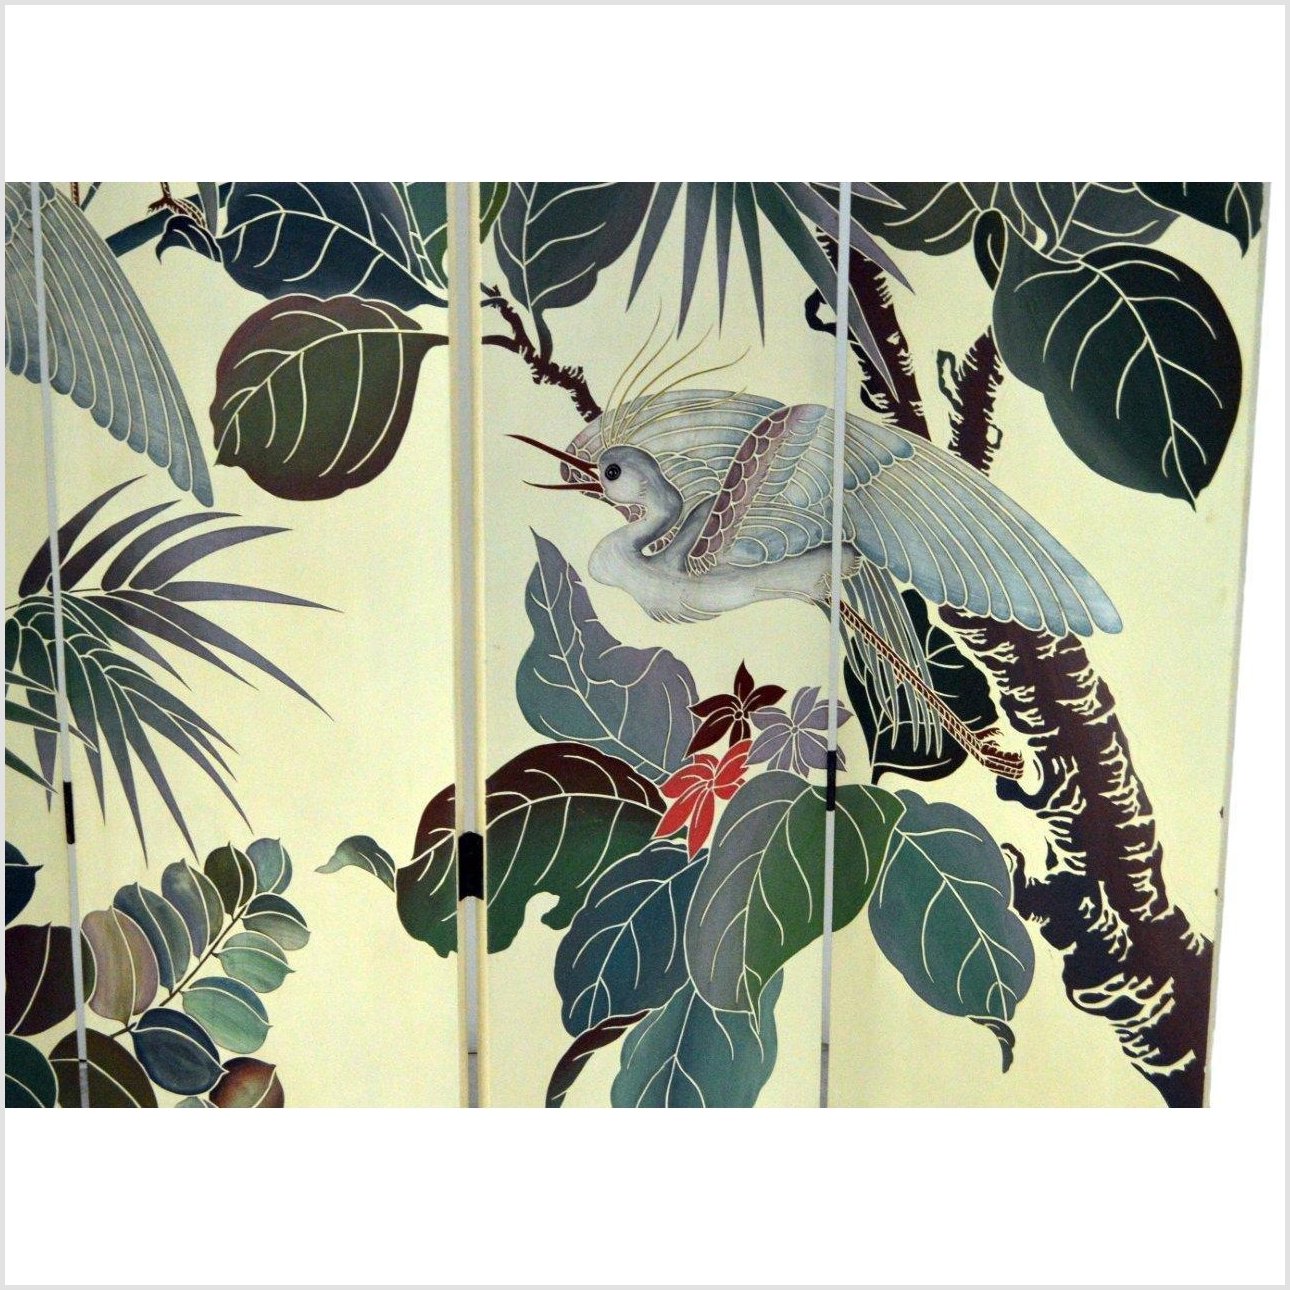 4-Panel Screen Designed with Cranes and Tropical Plants-YN2850-13. Asian & Chinese Furniture, Art, Antiques, Vintage Home Décor for sale at FEA Home